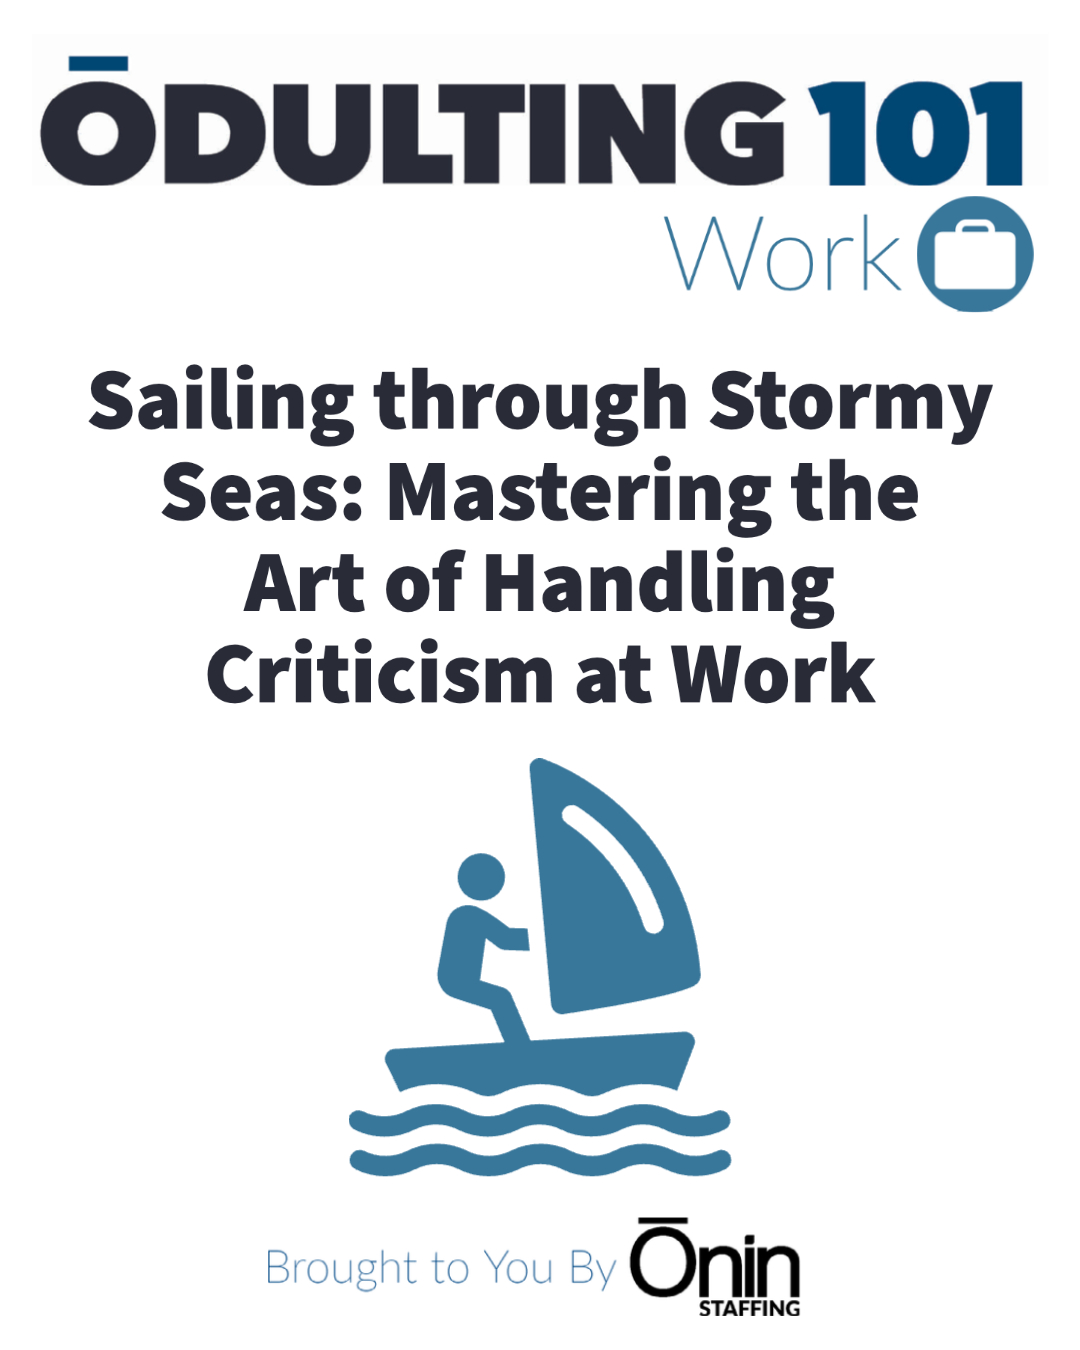 Image for Odulting series blog post - Sailing through Stormy Seas: Mastering the Art of Handling Criticism at Work. Features text 'Odulting' in black and 'Work' in blue, with a line drawing of a blue sailboat and a person navigating the sails. 'Brought to you by Onin Staffing' appears at the bottom